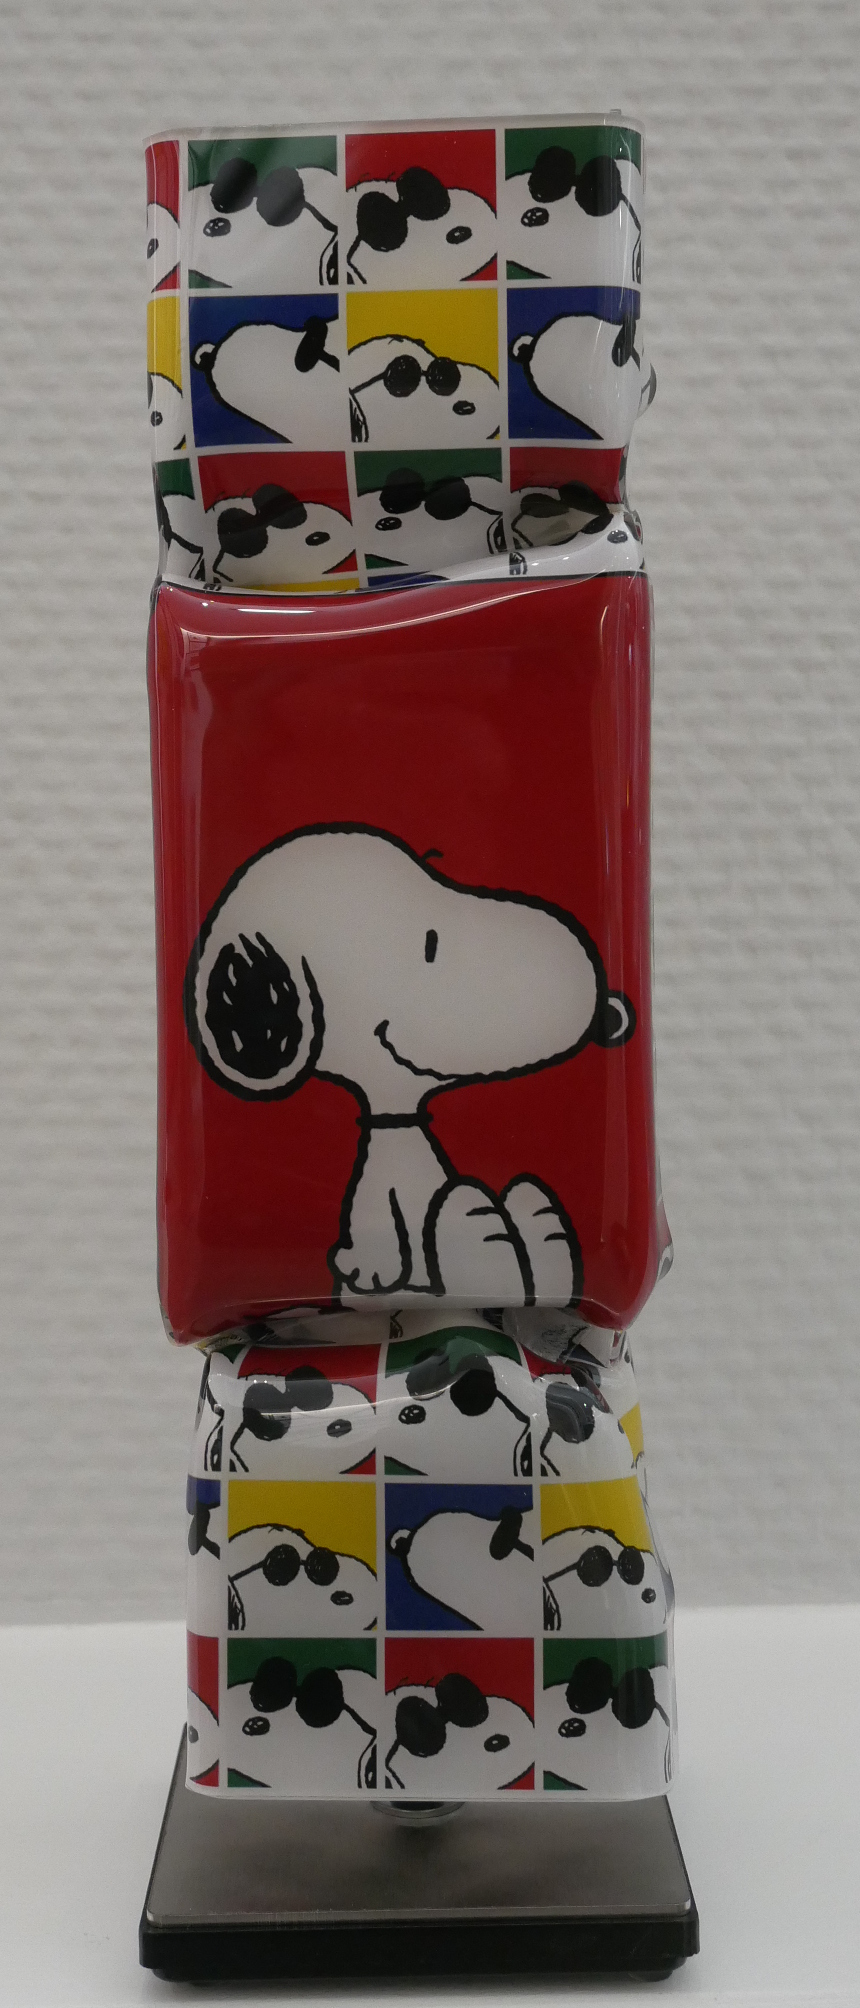 Art Candy - Snoopy red,yellow